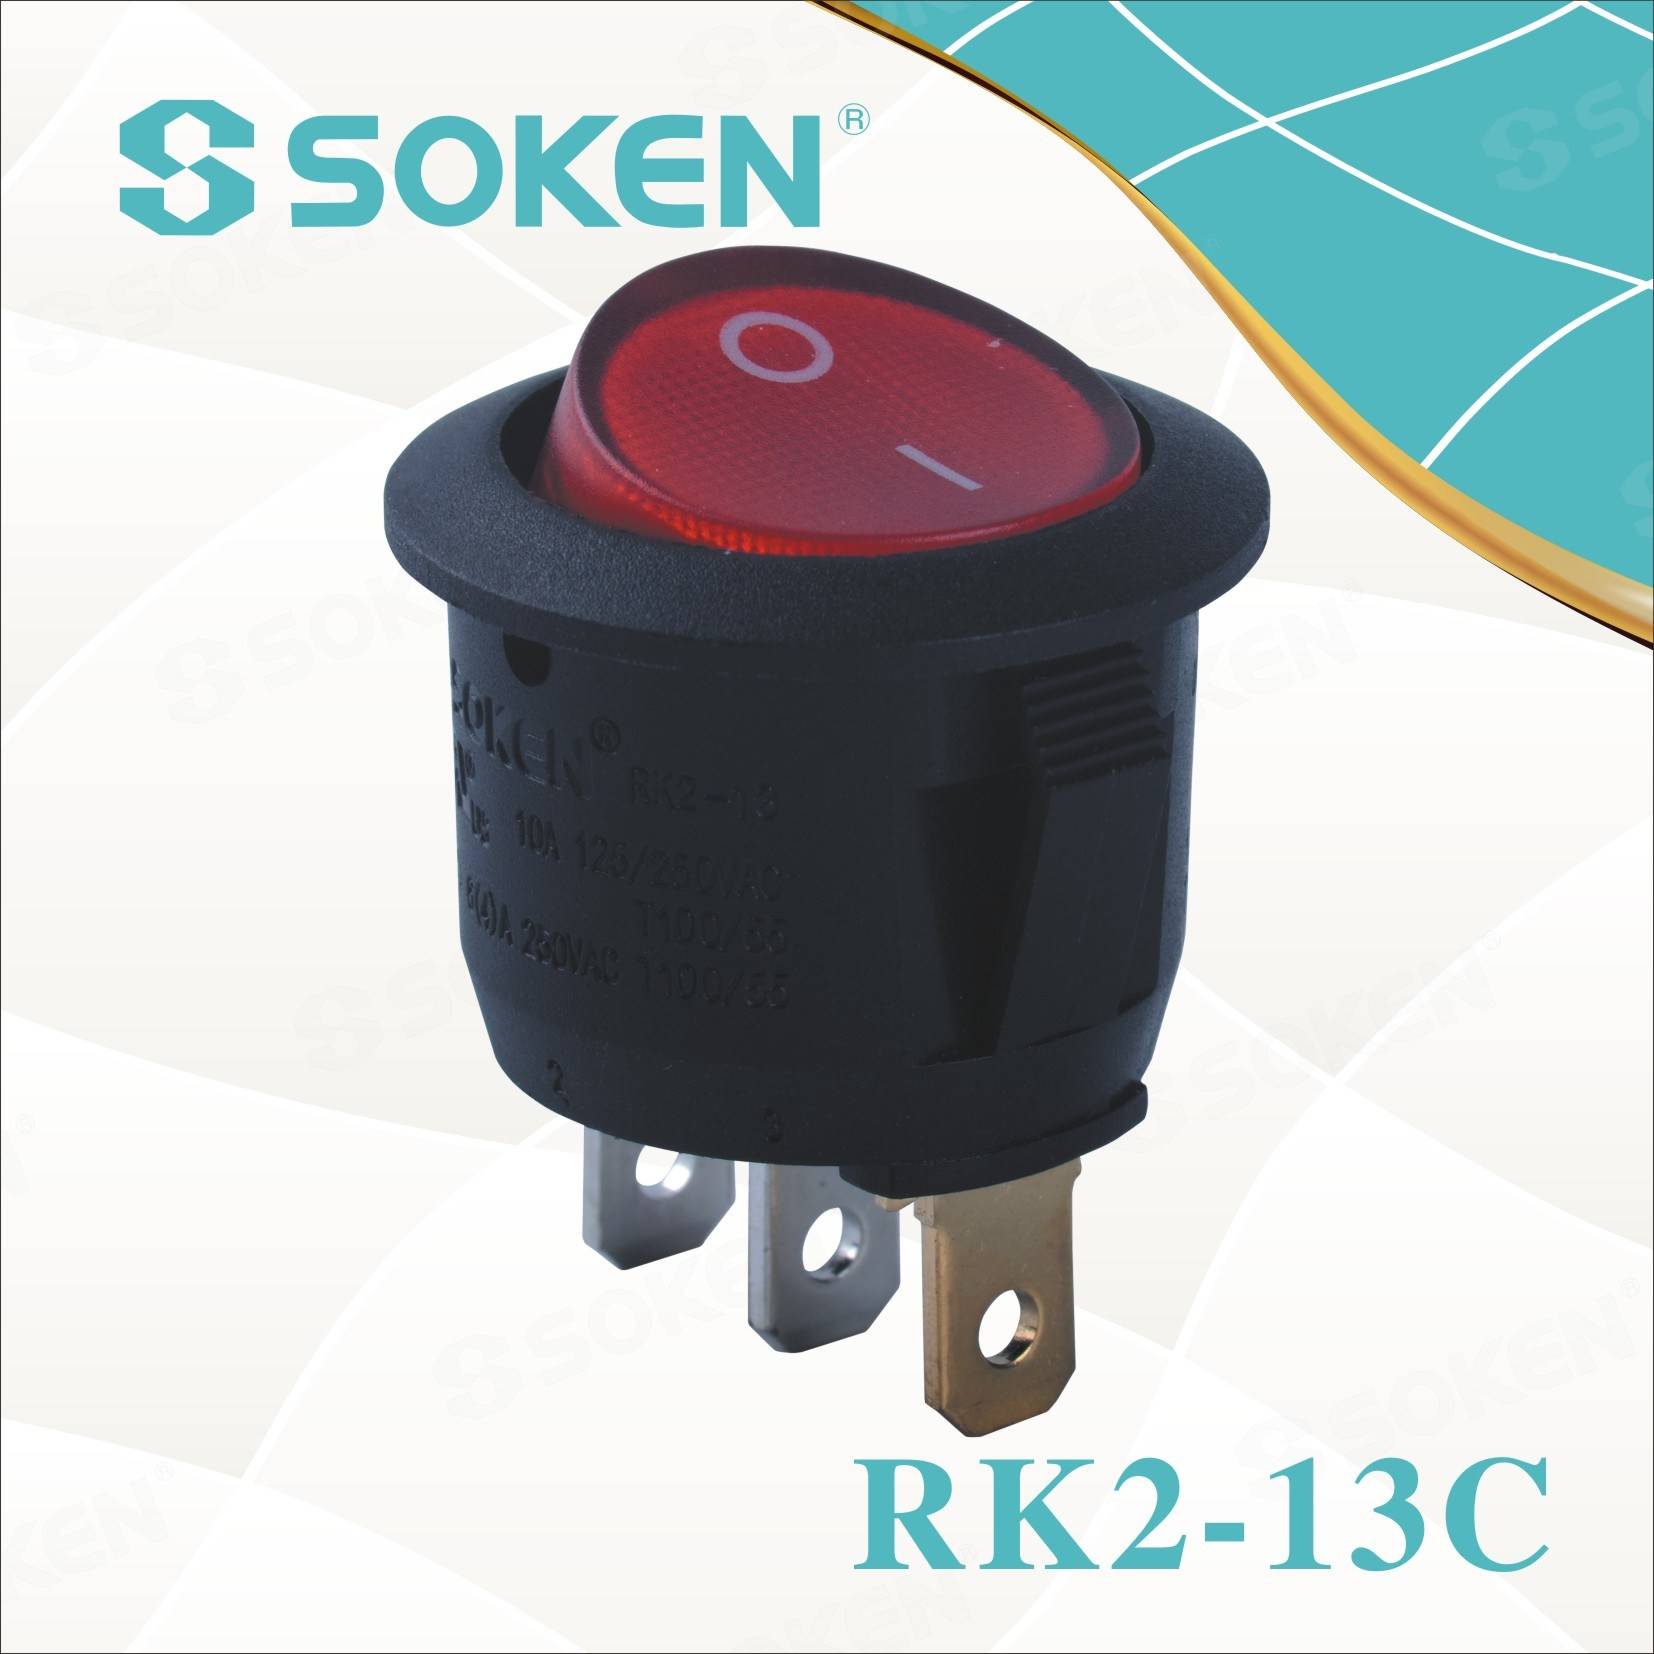 Factory Directly supply Push Button Reset Switch -
 Soken Rk2-13c 1X1n Round on off Rocker Switch – Master Soken Electrical